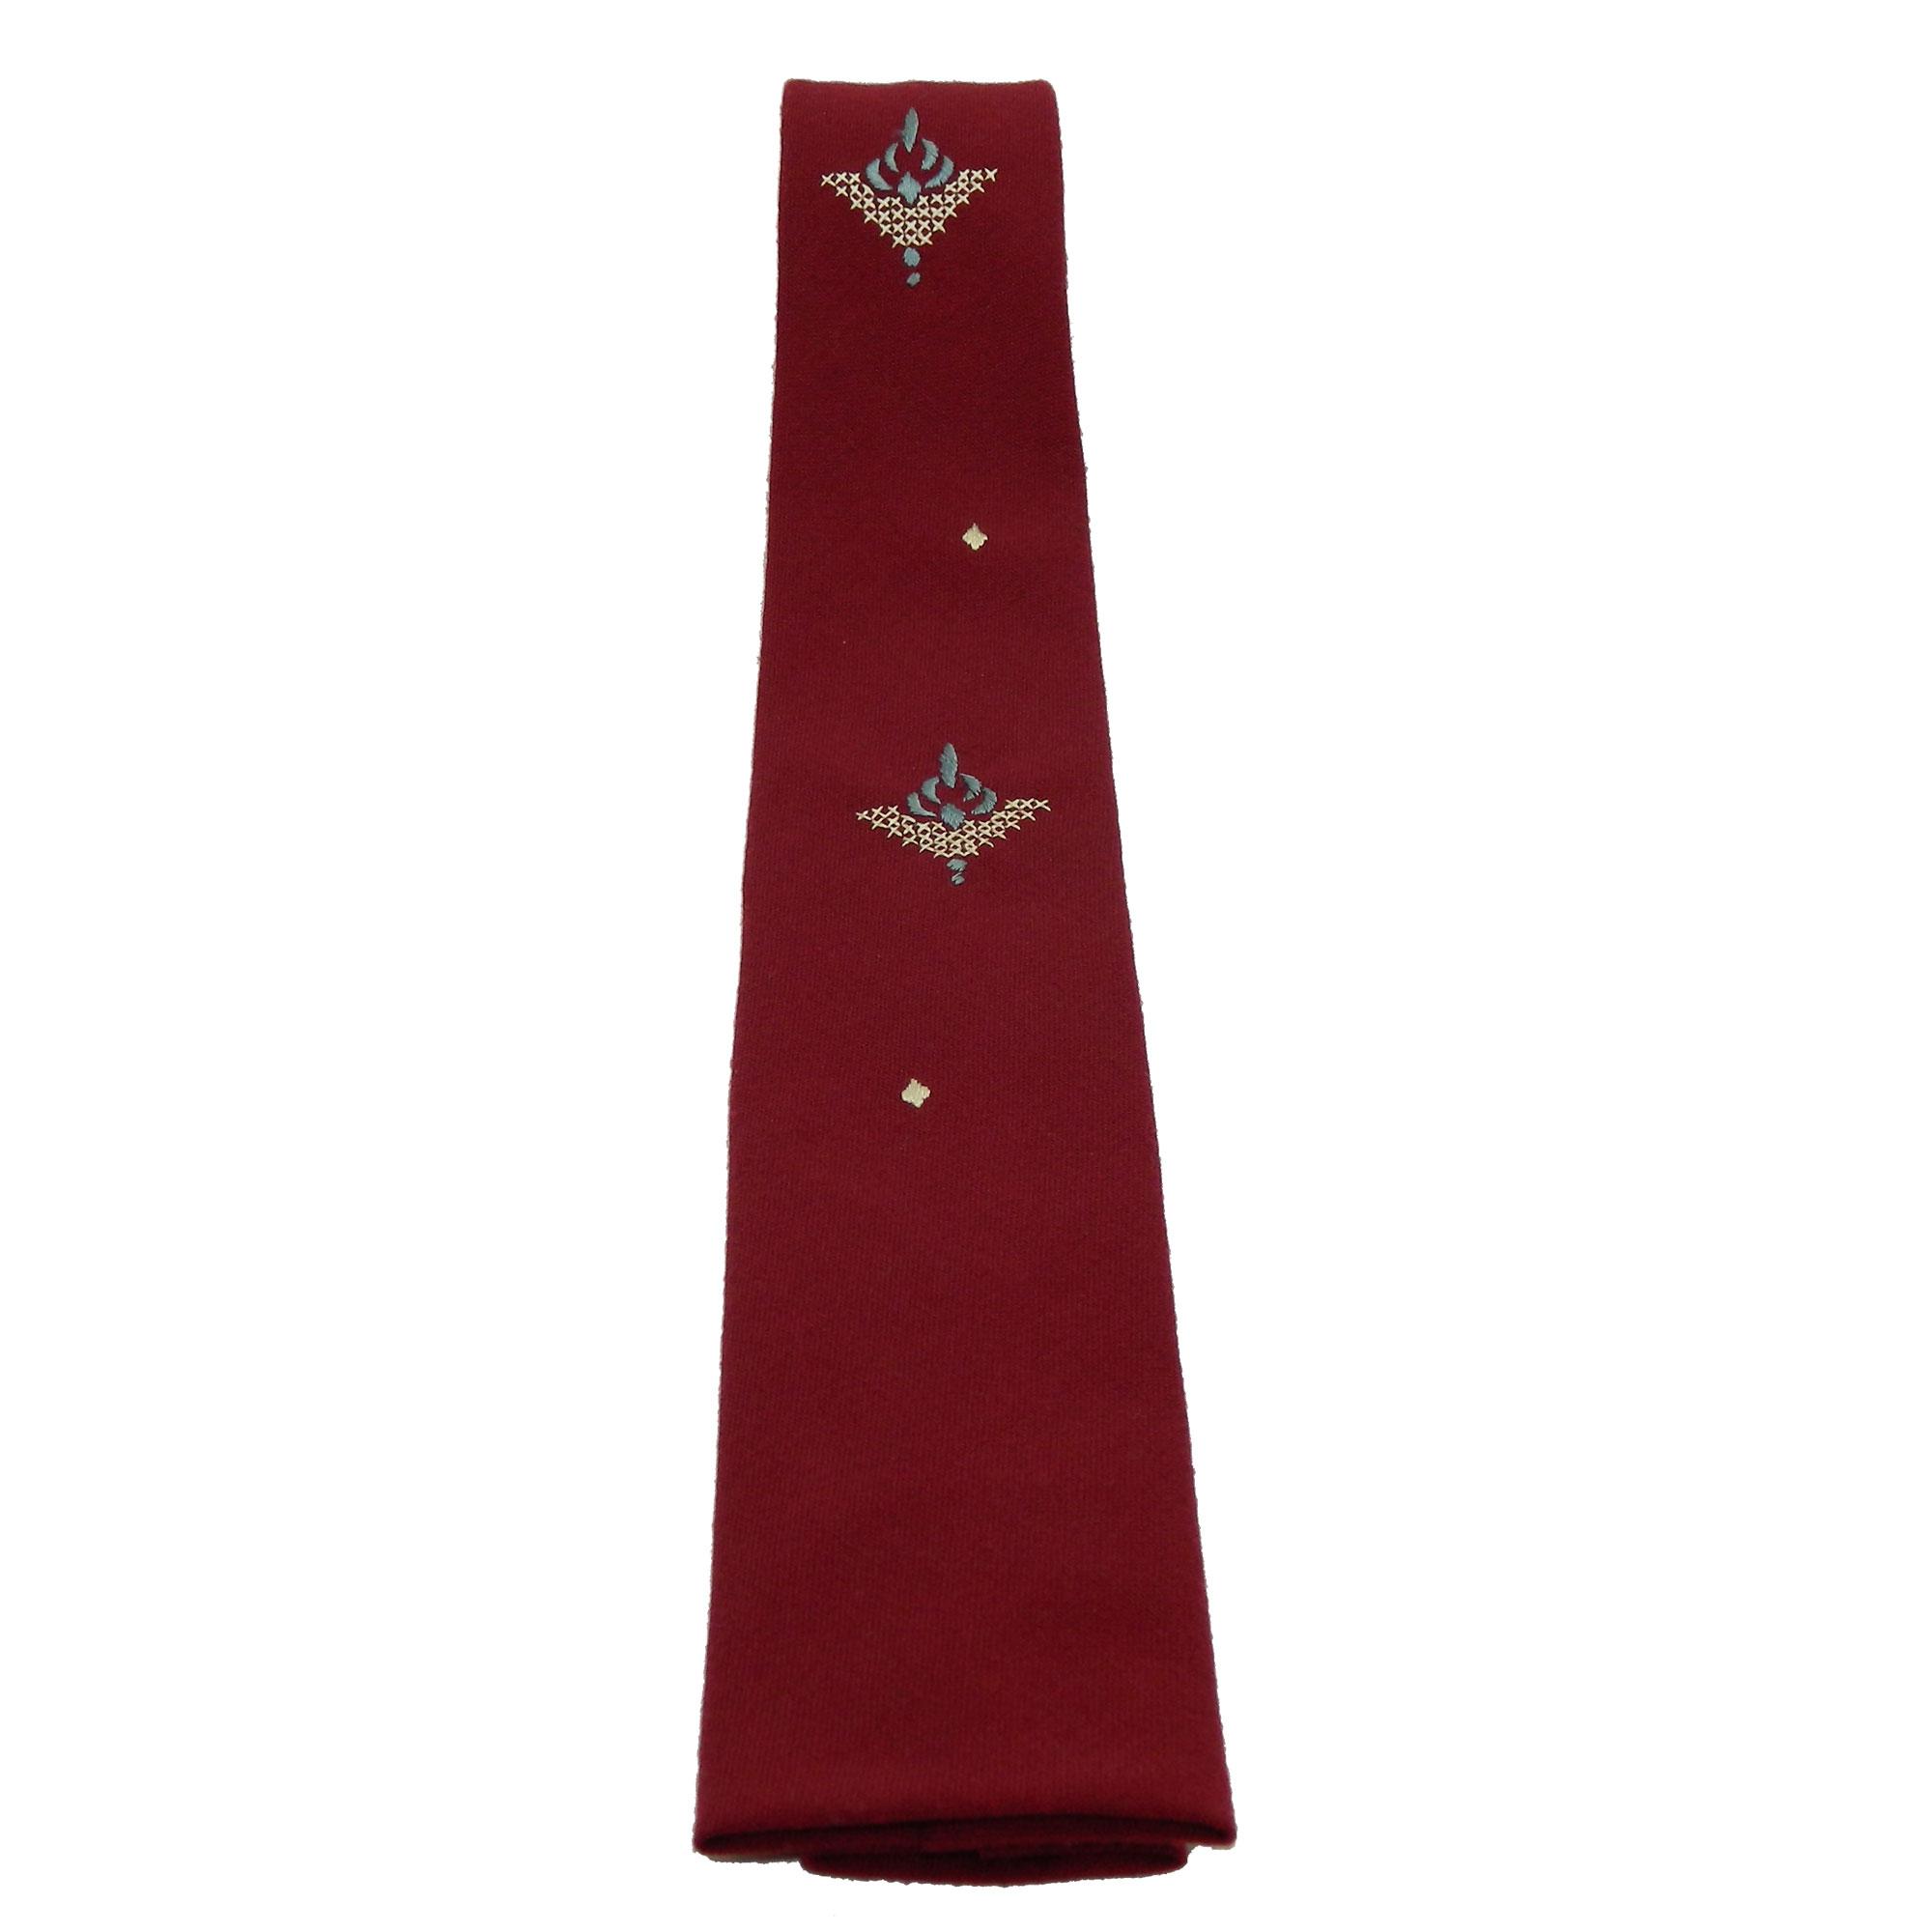 1950s embroidered square cut tie